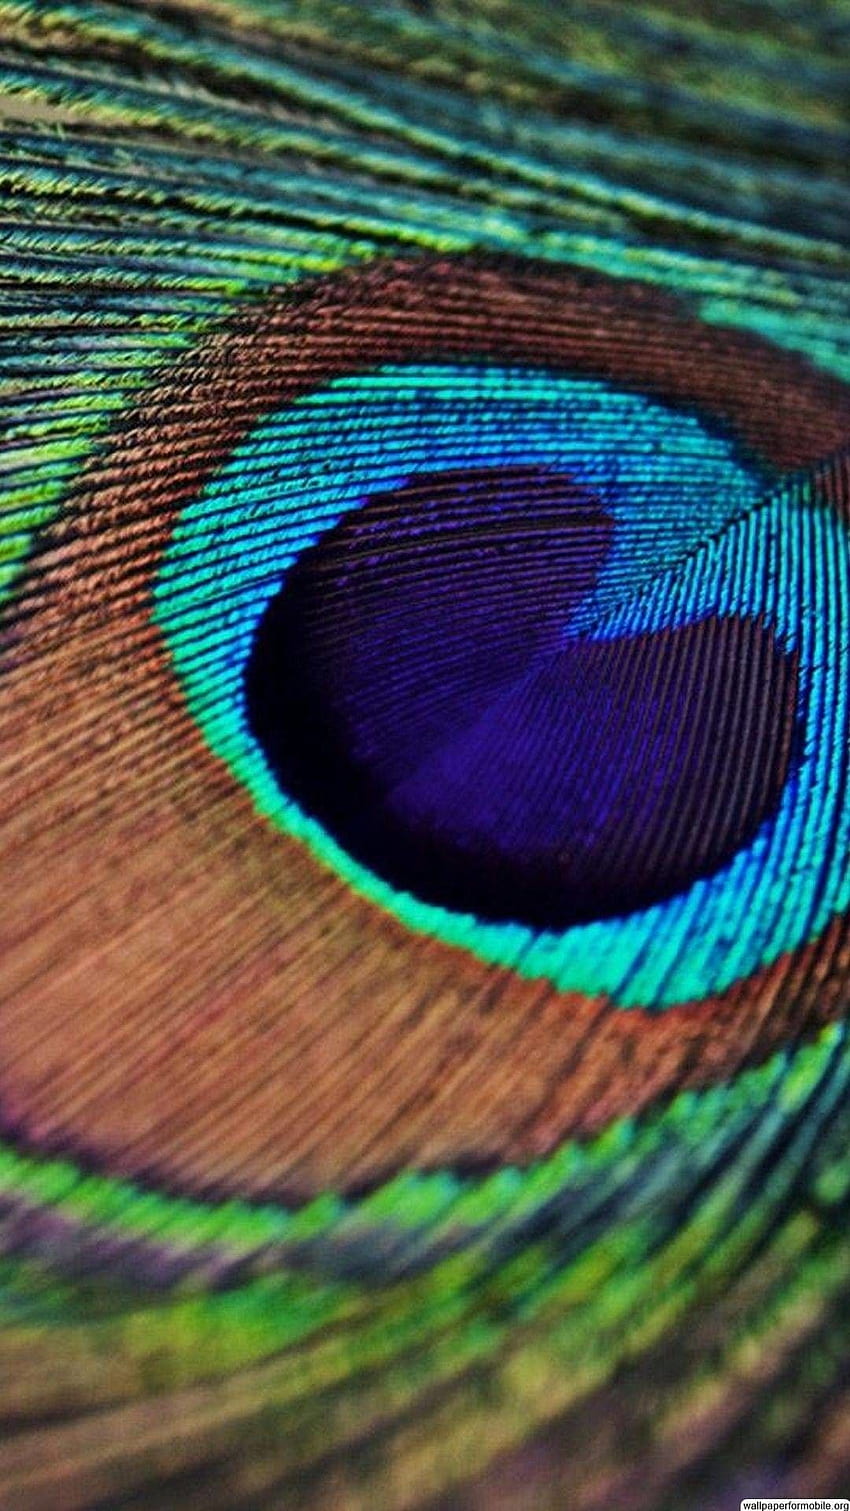 Single Peacock Feather - Peacock Feather For iPhone - & Background, Mor ...